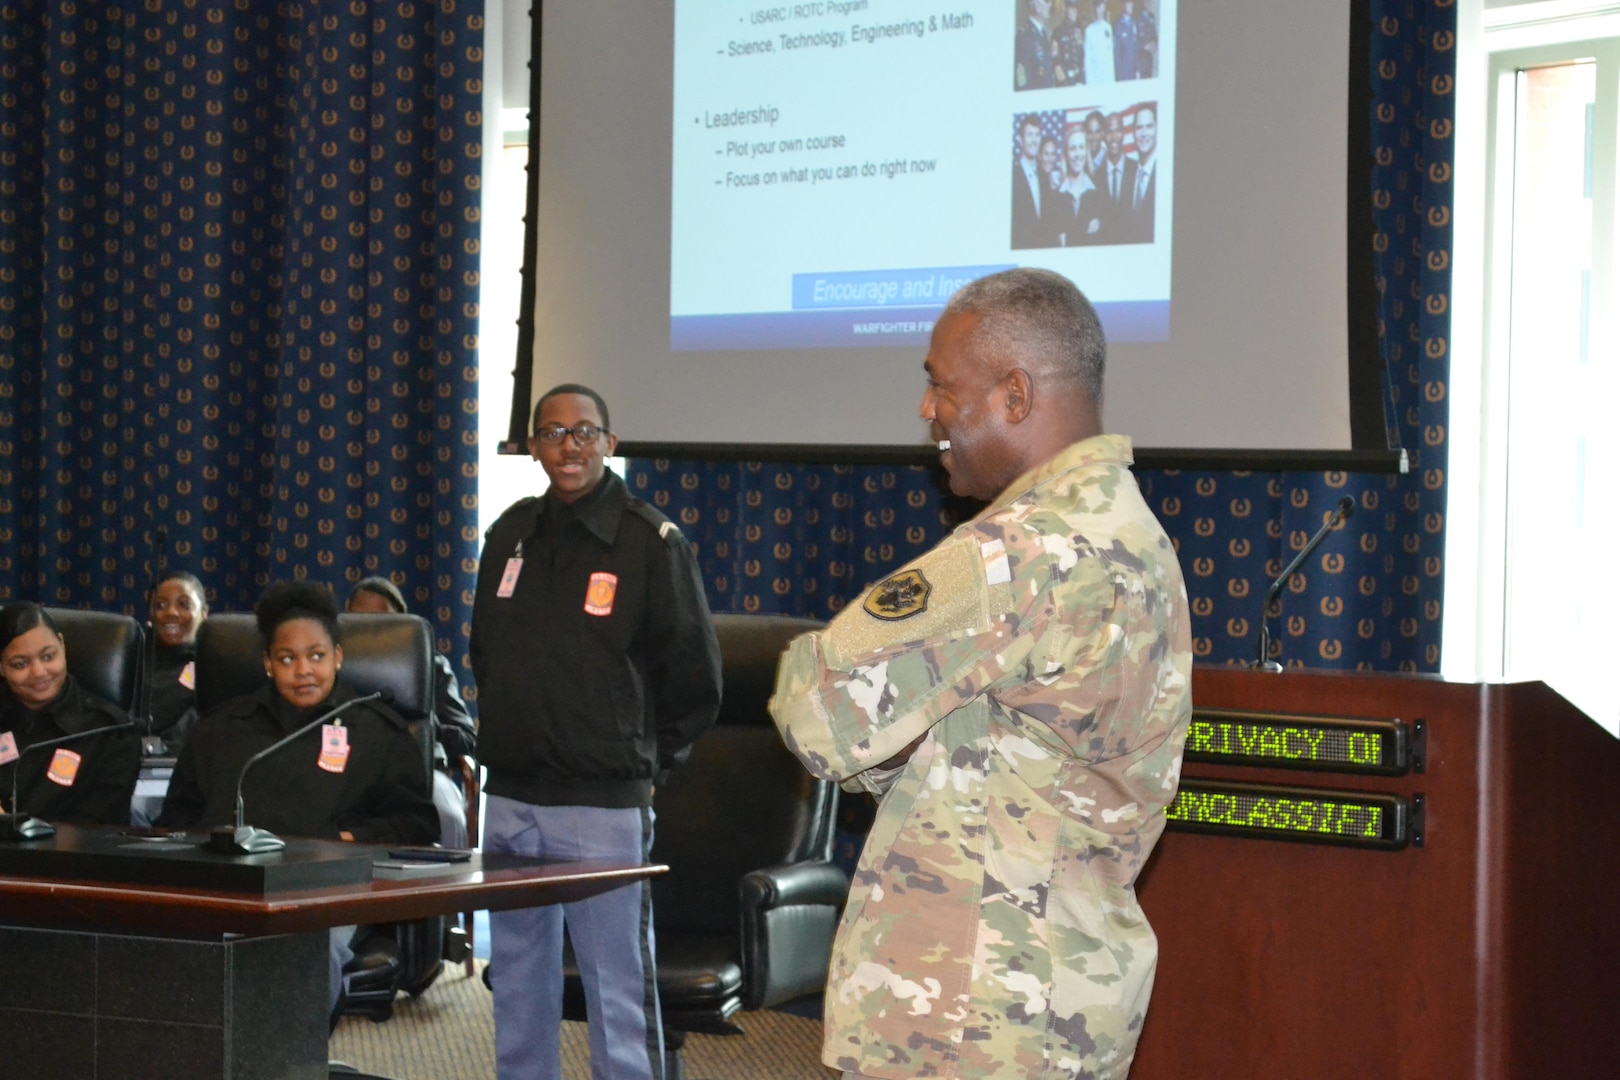 Army 3-star general in fatigues at right; JROTC students at left, in rear.